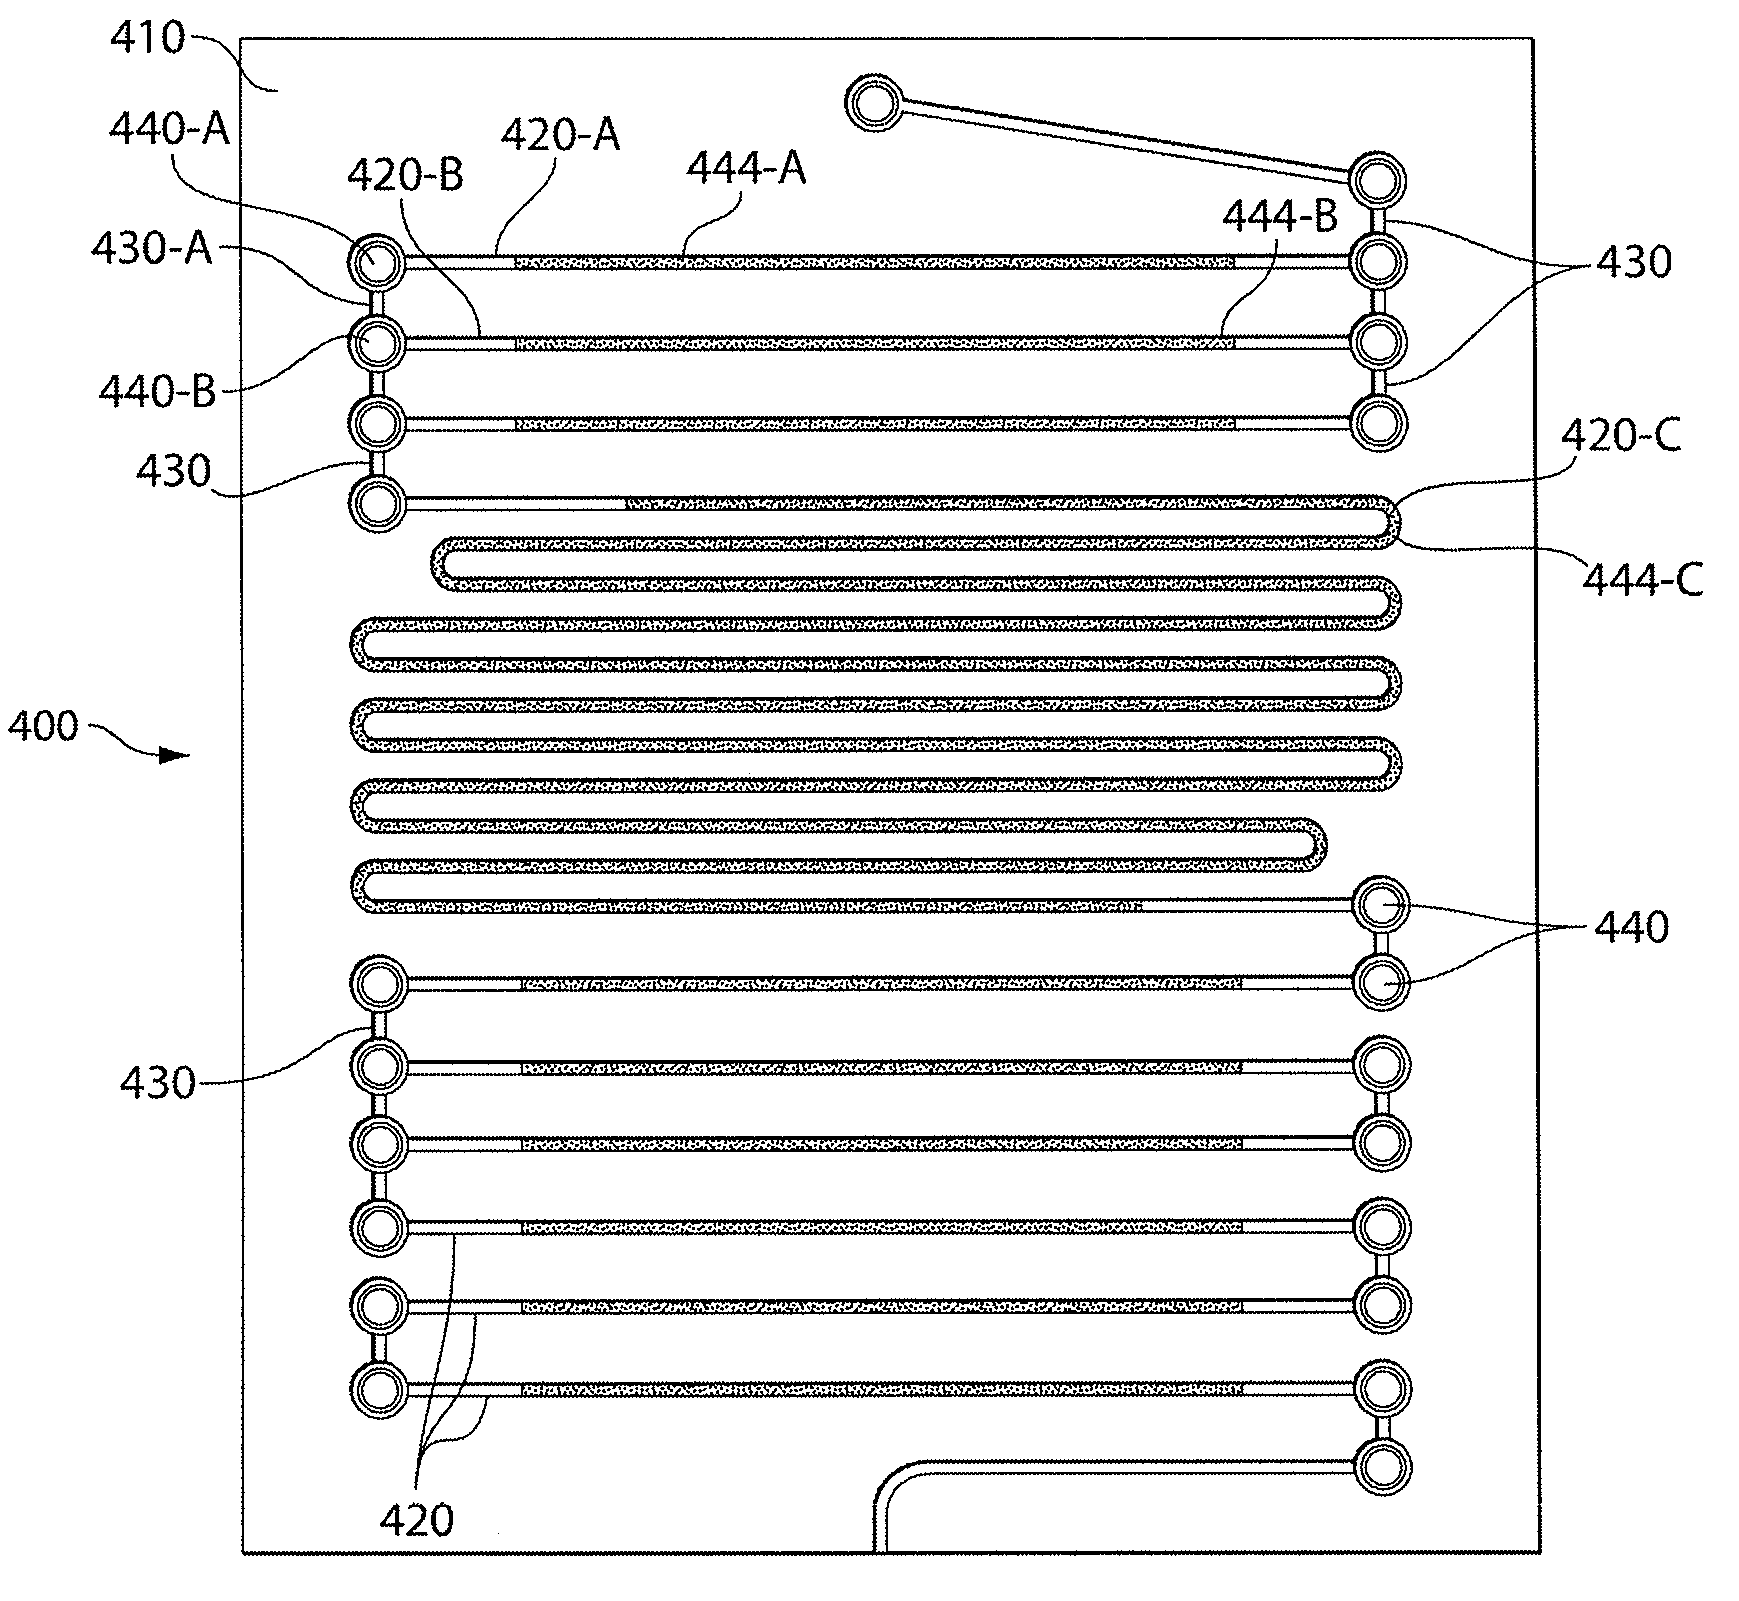 Reagent storage in microfluidic systems and related articles and methods